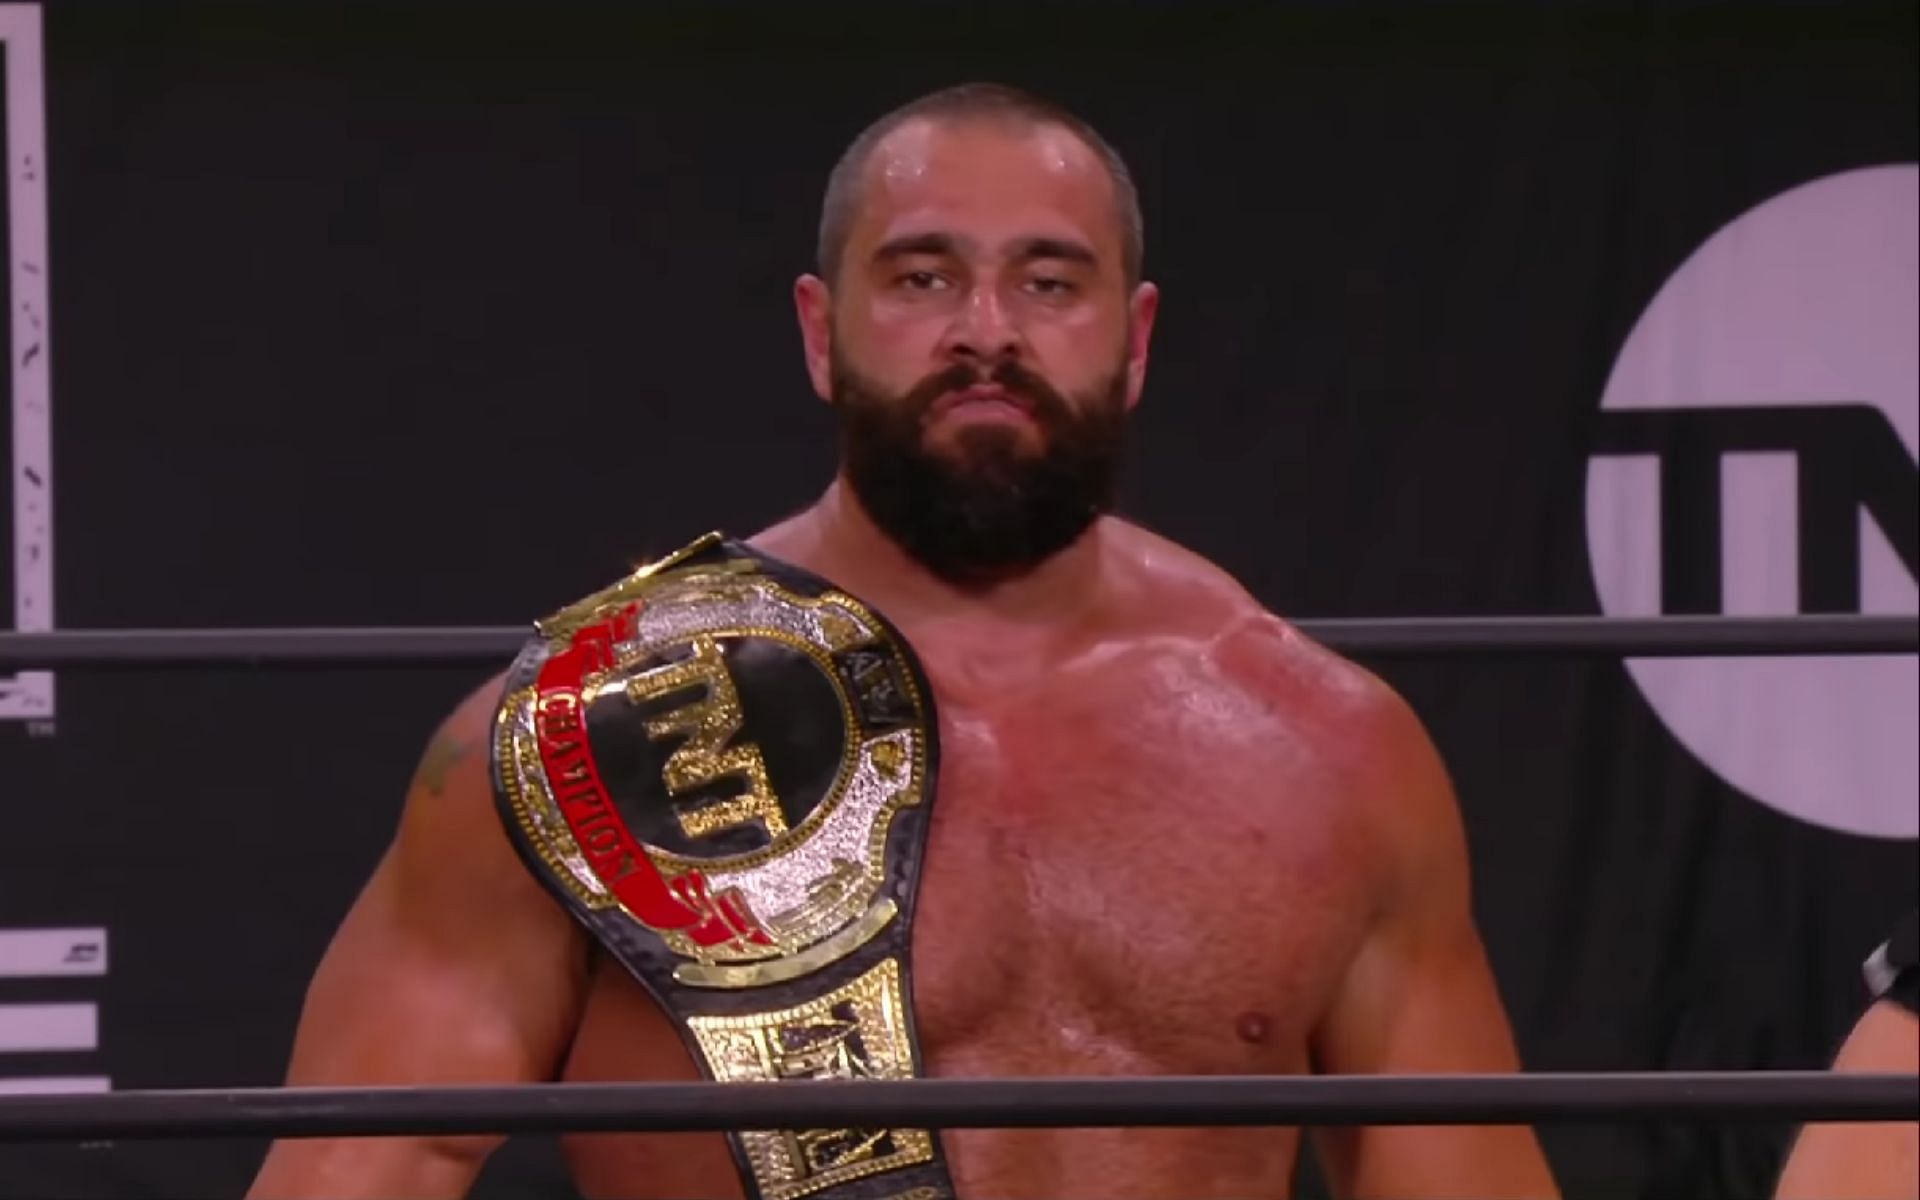 Miro is a former TNT Champion in AEW